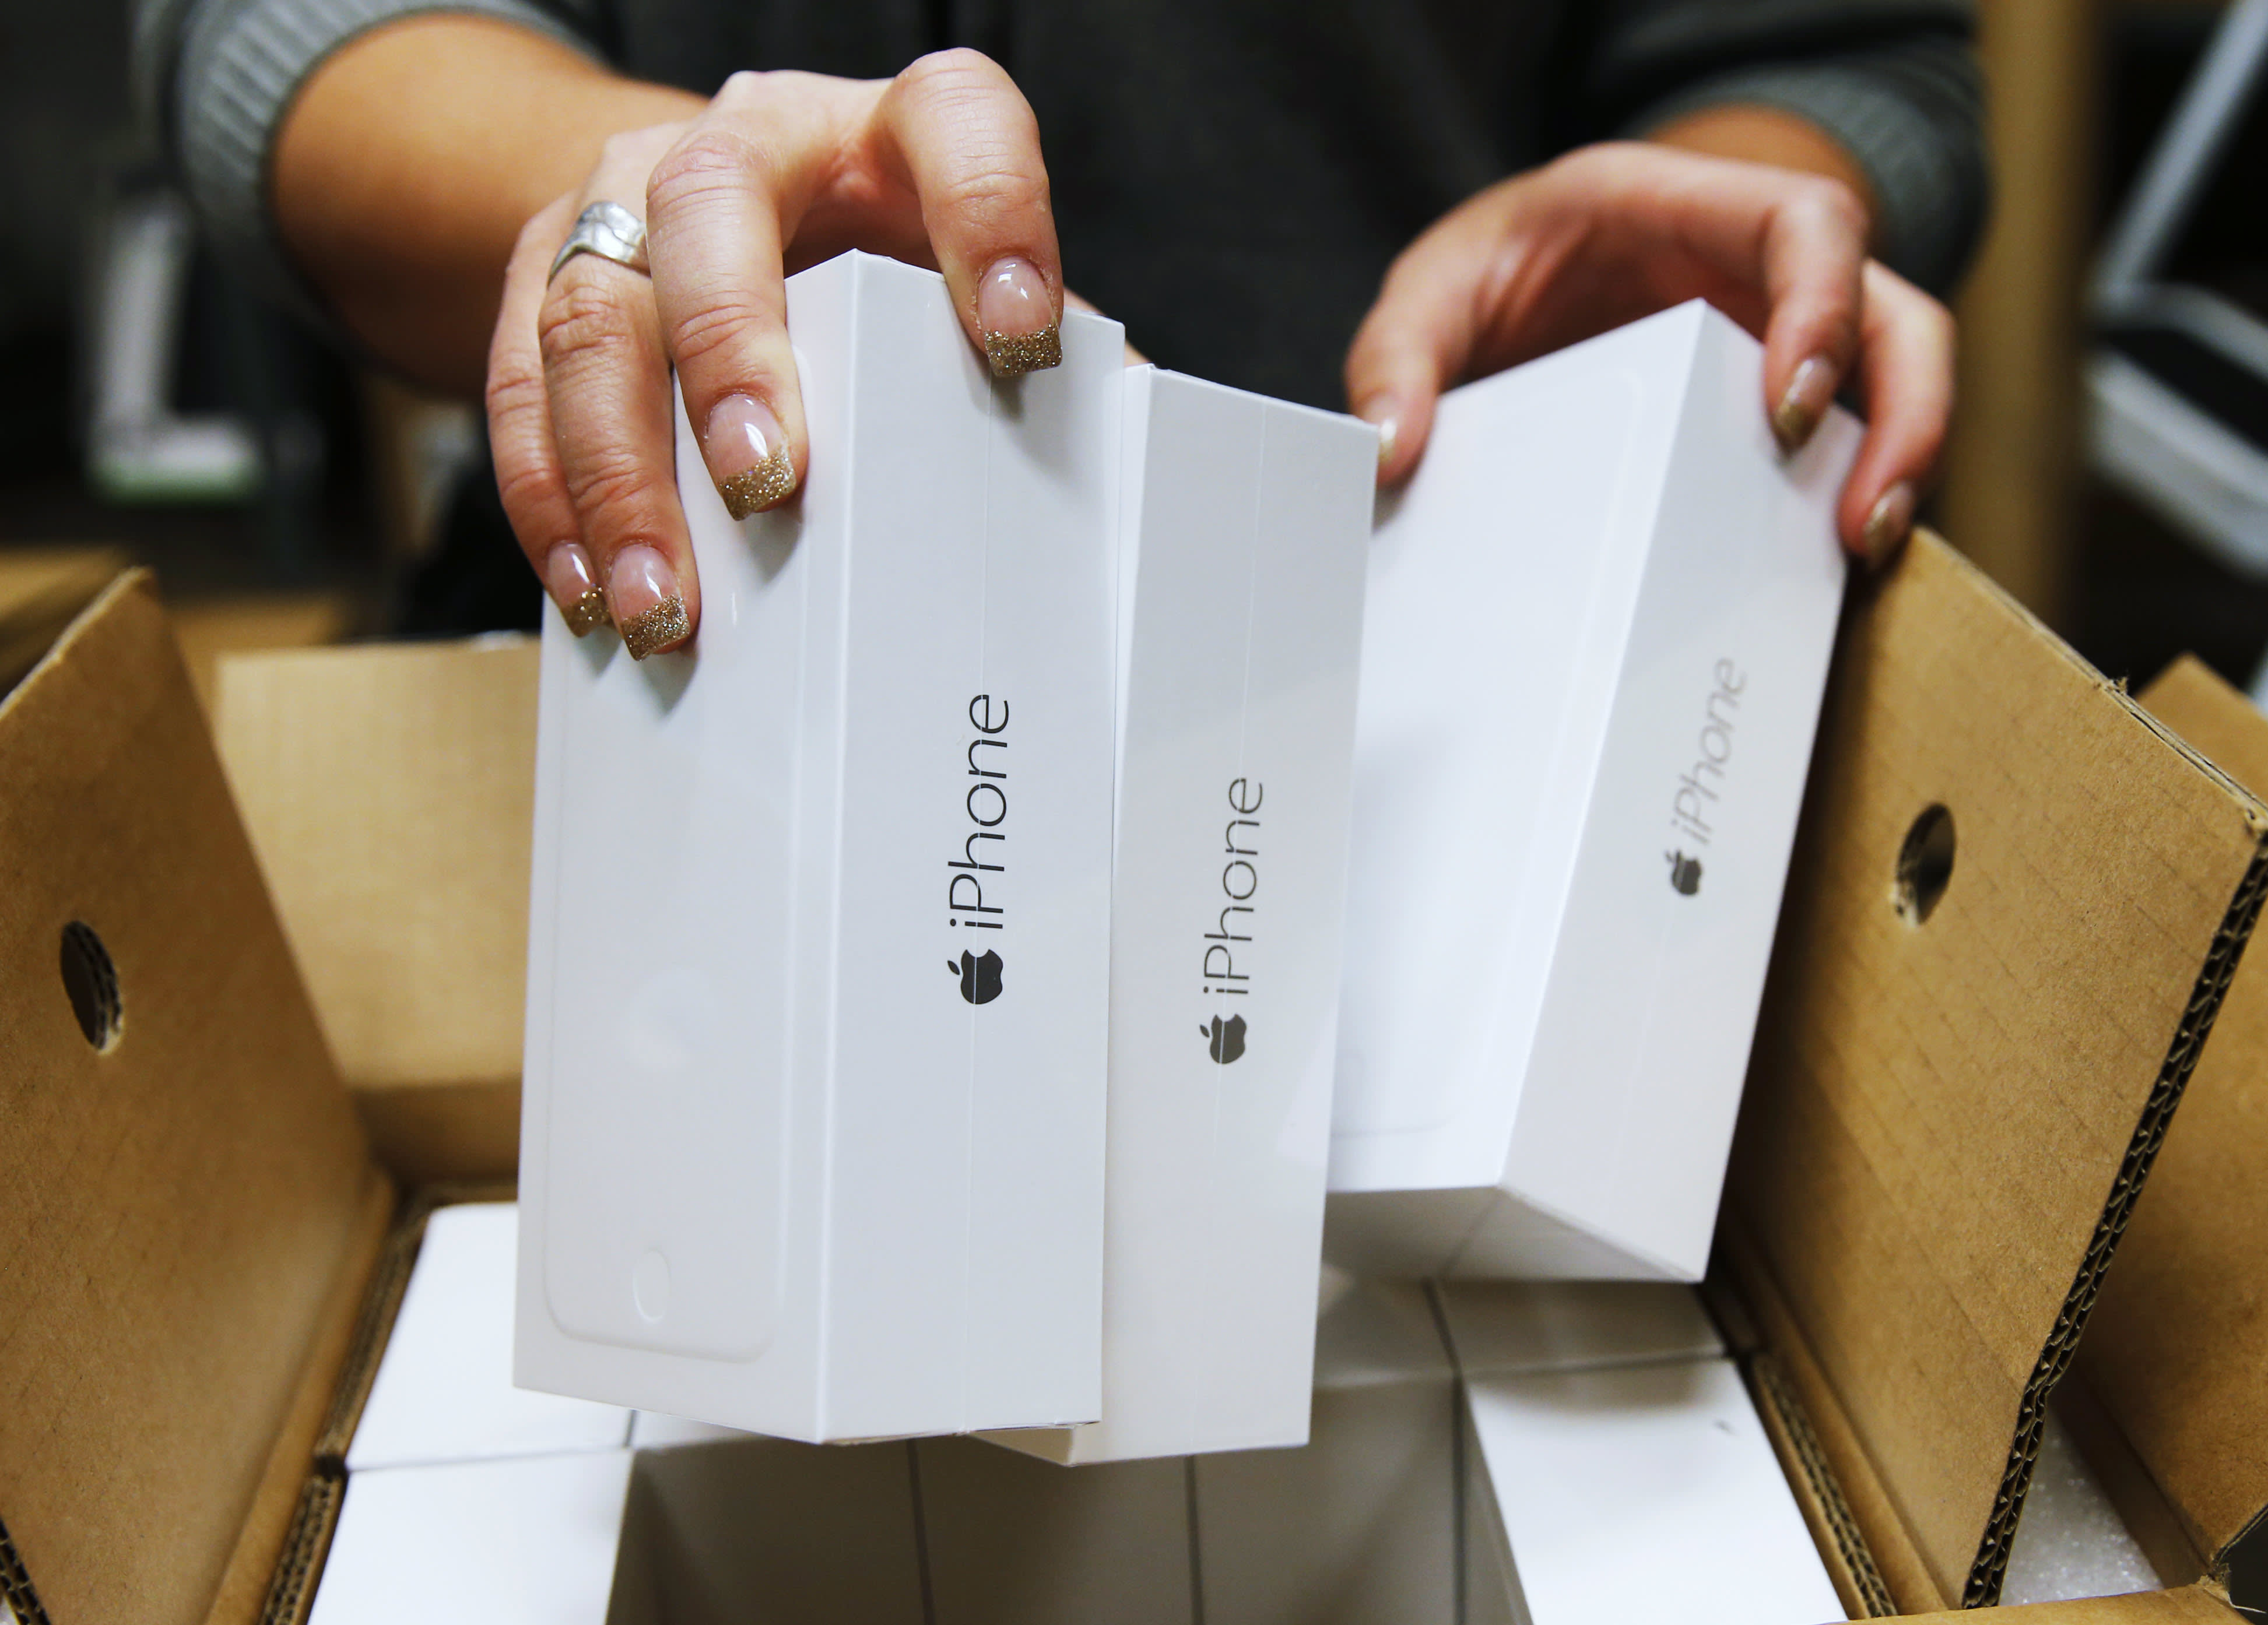 Apple's patent for a new kind of iPhone could boost sales, UBS says